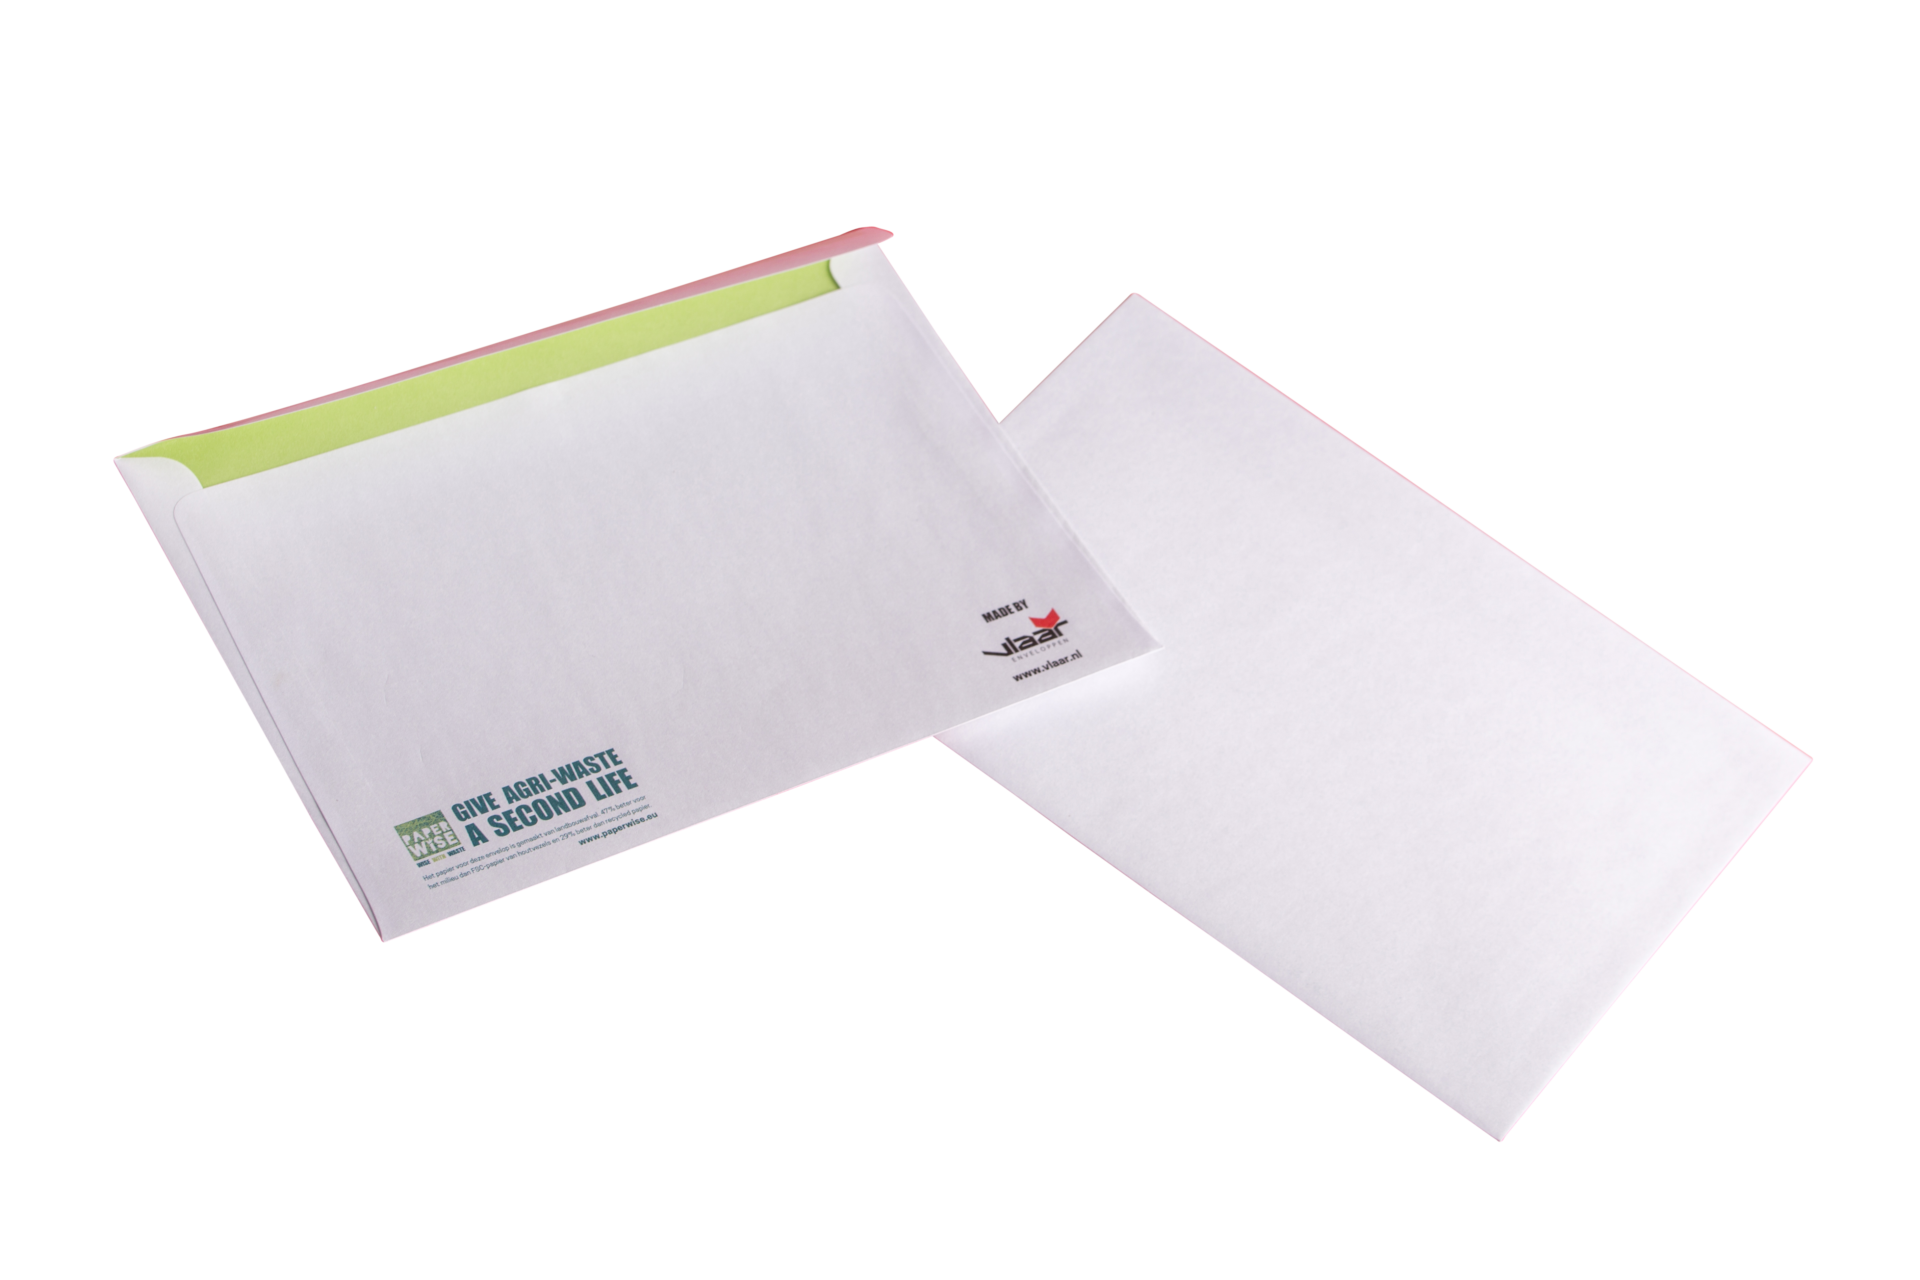 wp content uploads  0   0   eco friendly paper board office sustainable envelopes mailing white natural  8c